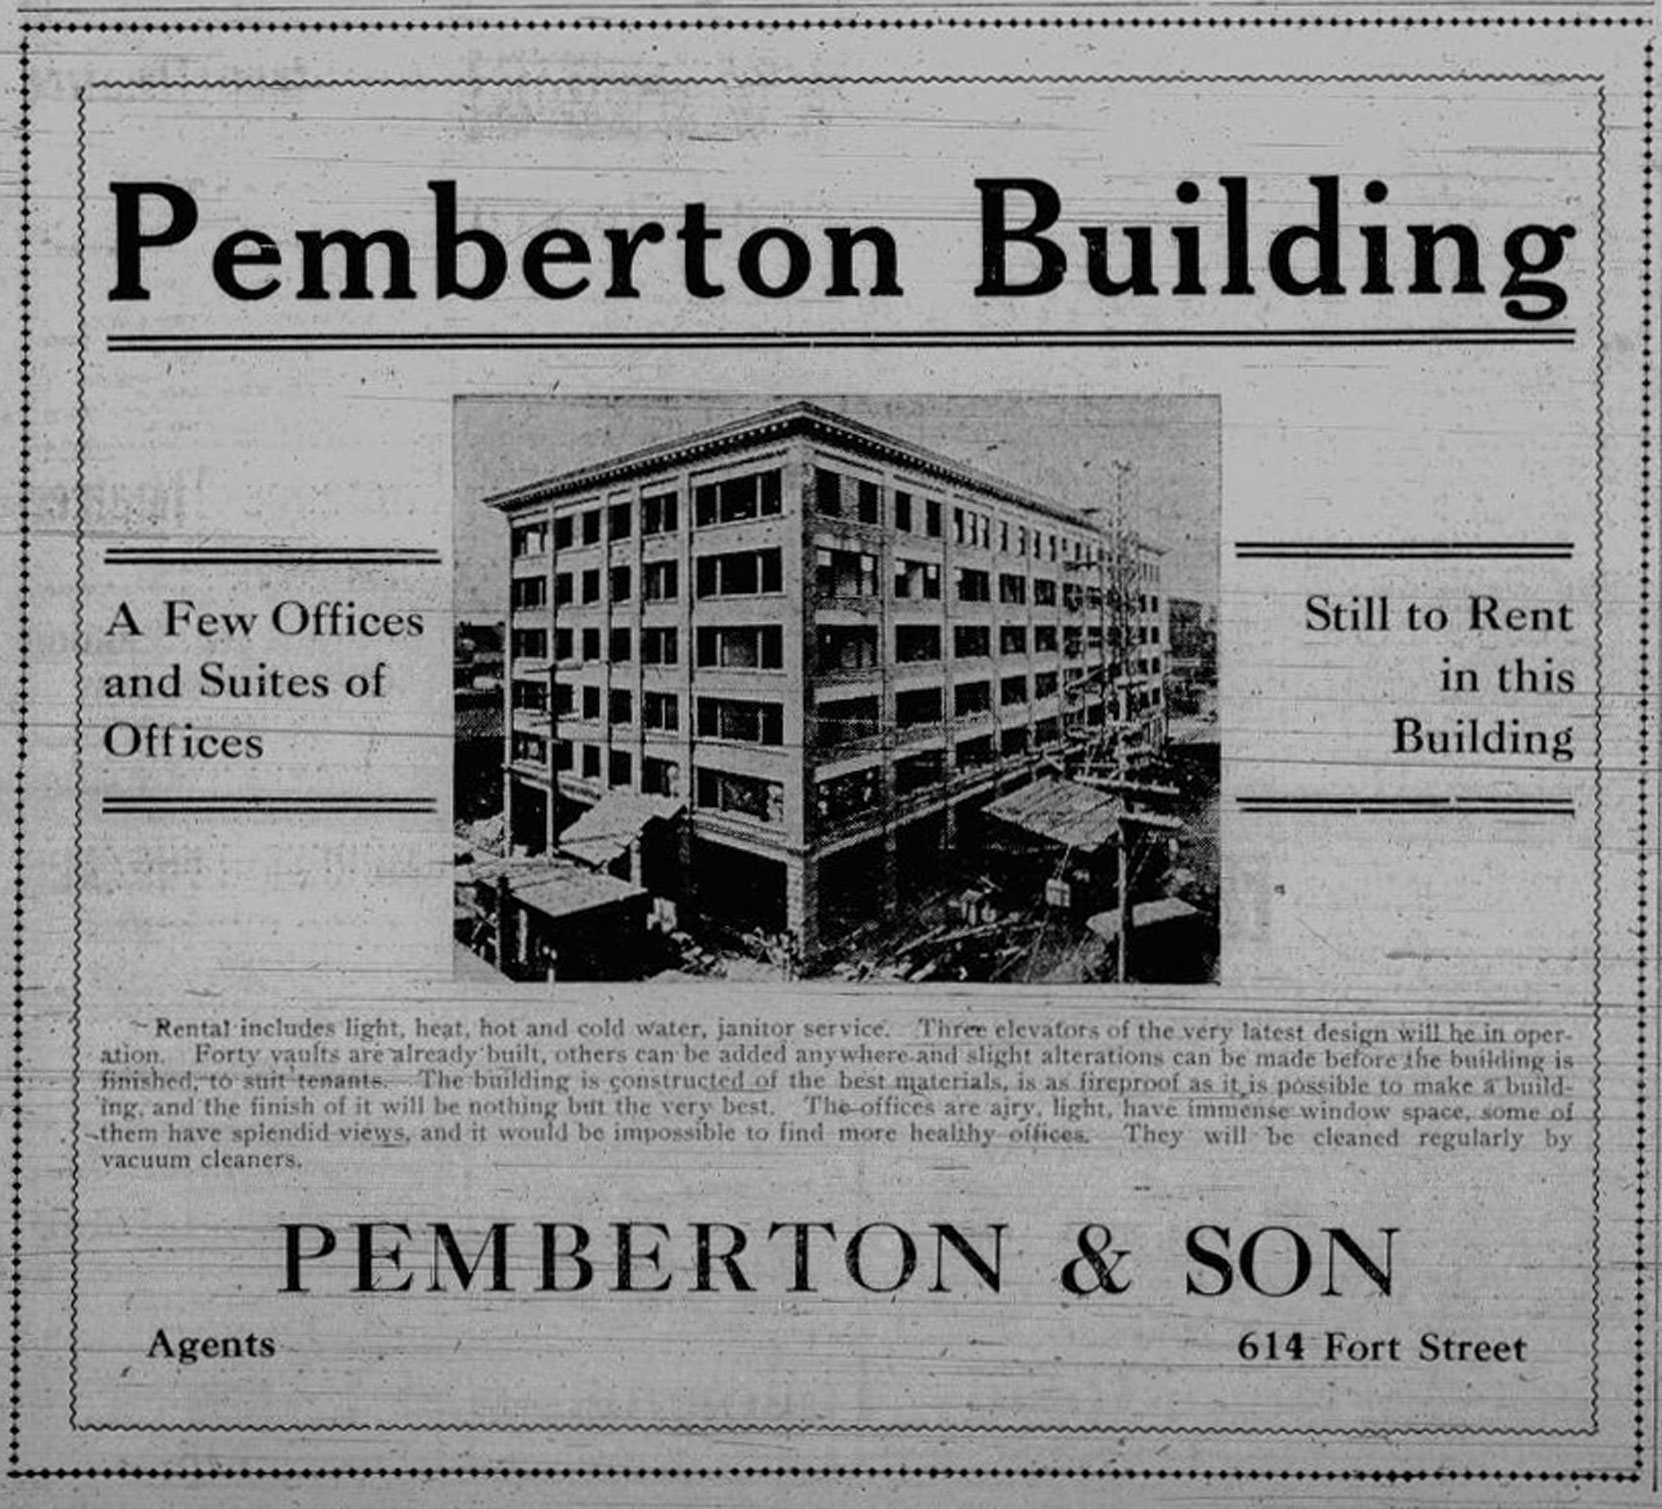 1910 advertisement showing the Pemberton Building (now the Yarrow Building) under construction. This view is looking northwest from the corner of Broad Street and Broughton Street (Victoria Online Sightseeing Tours collection)